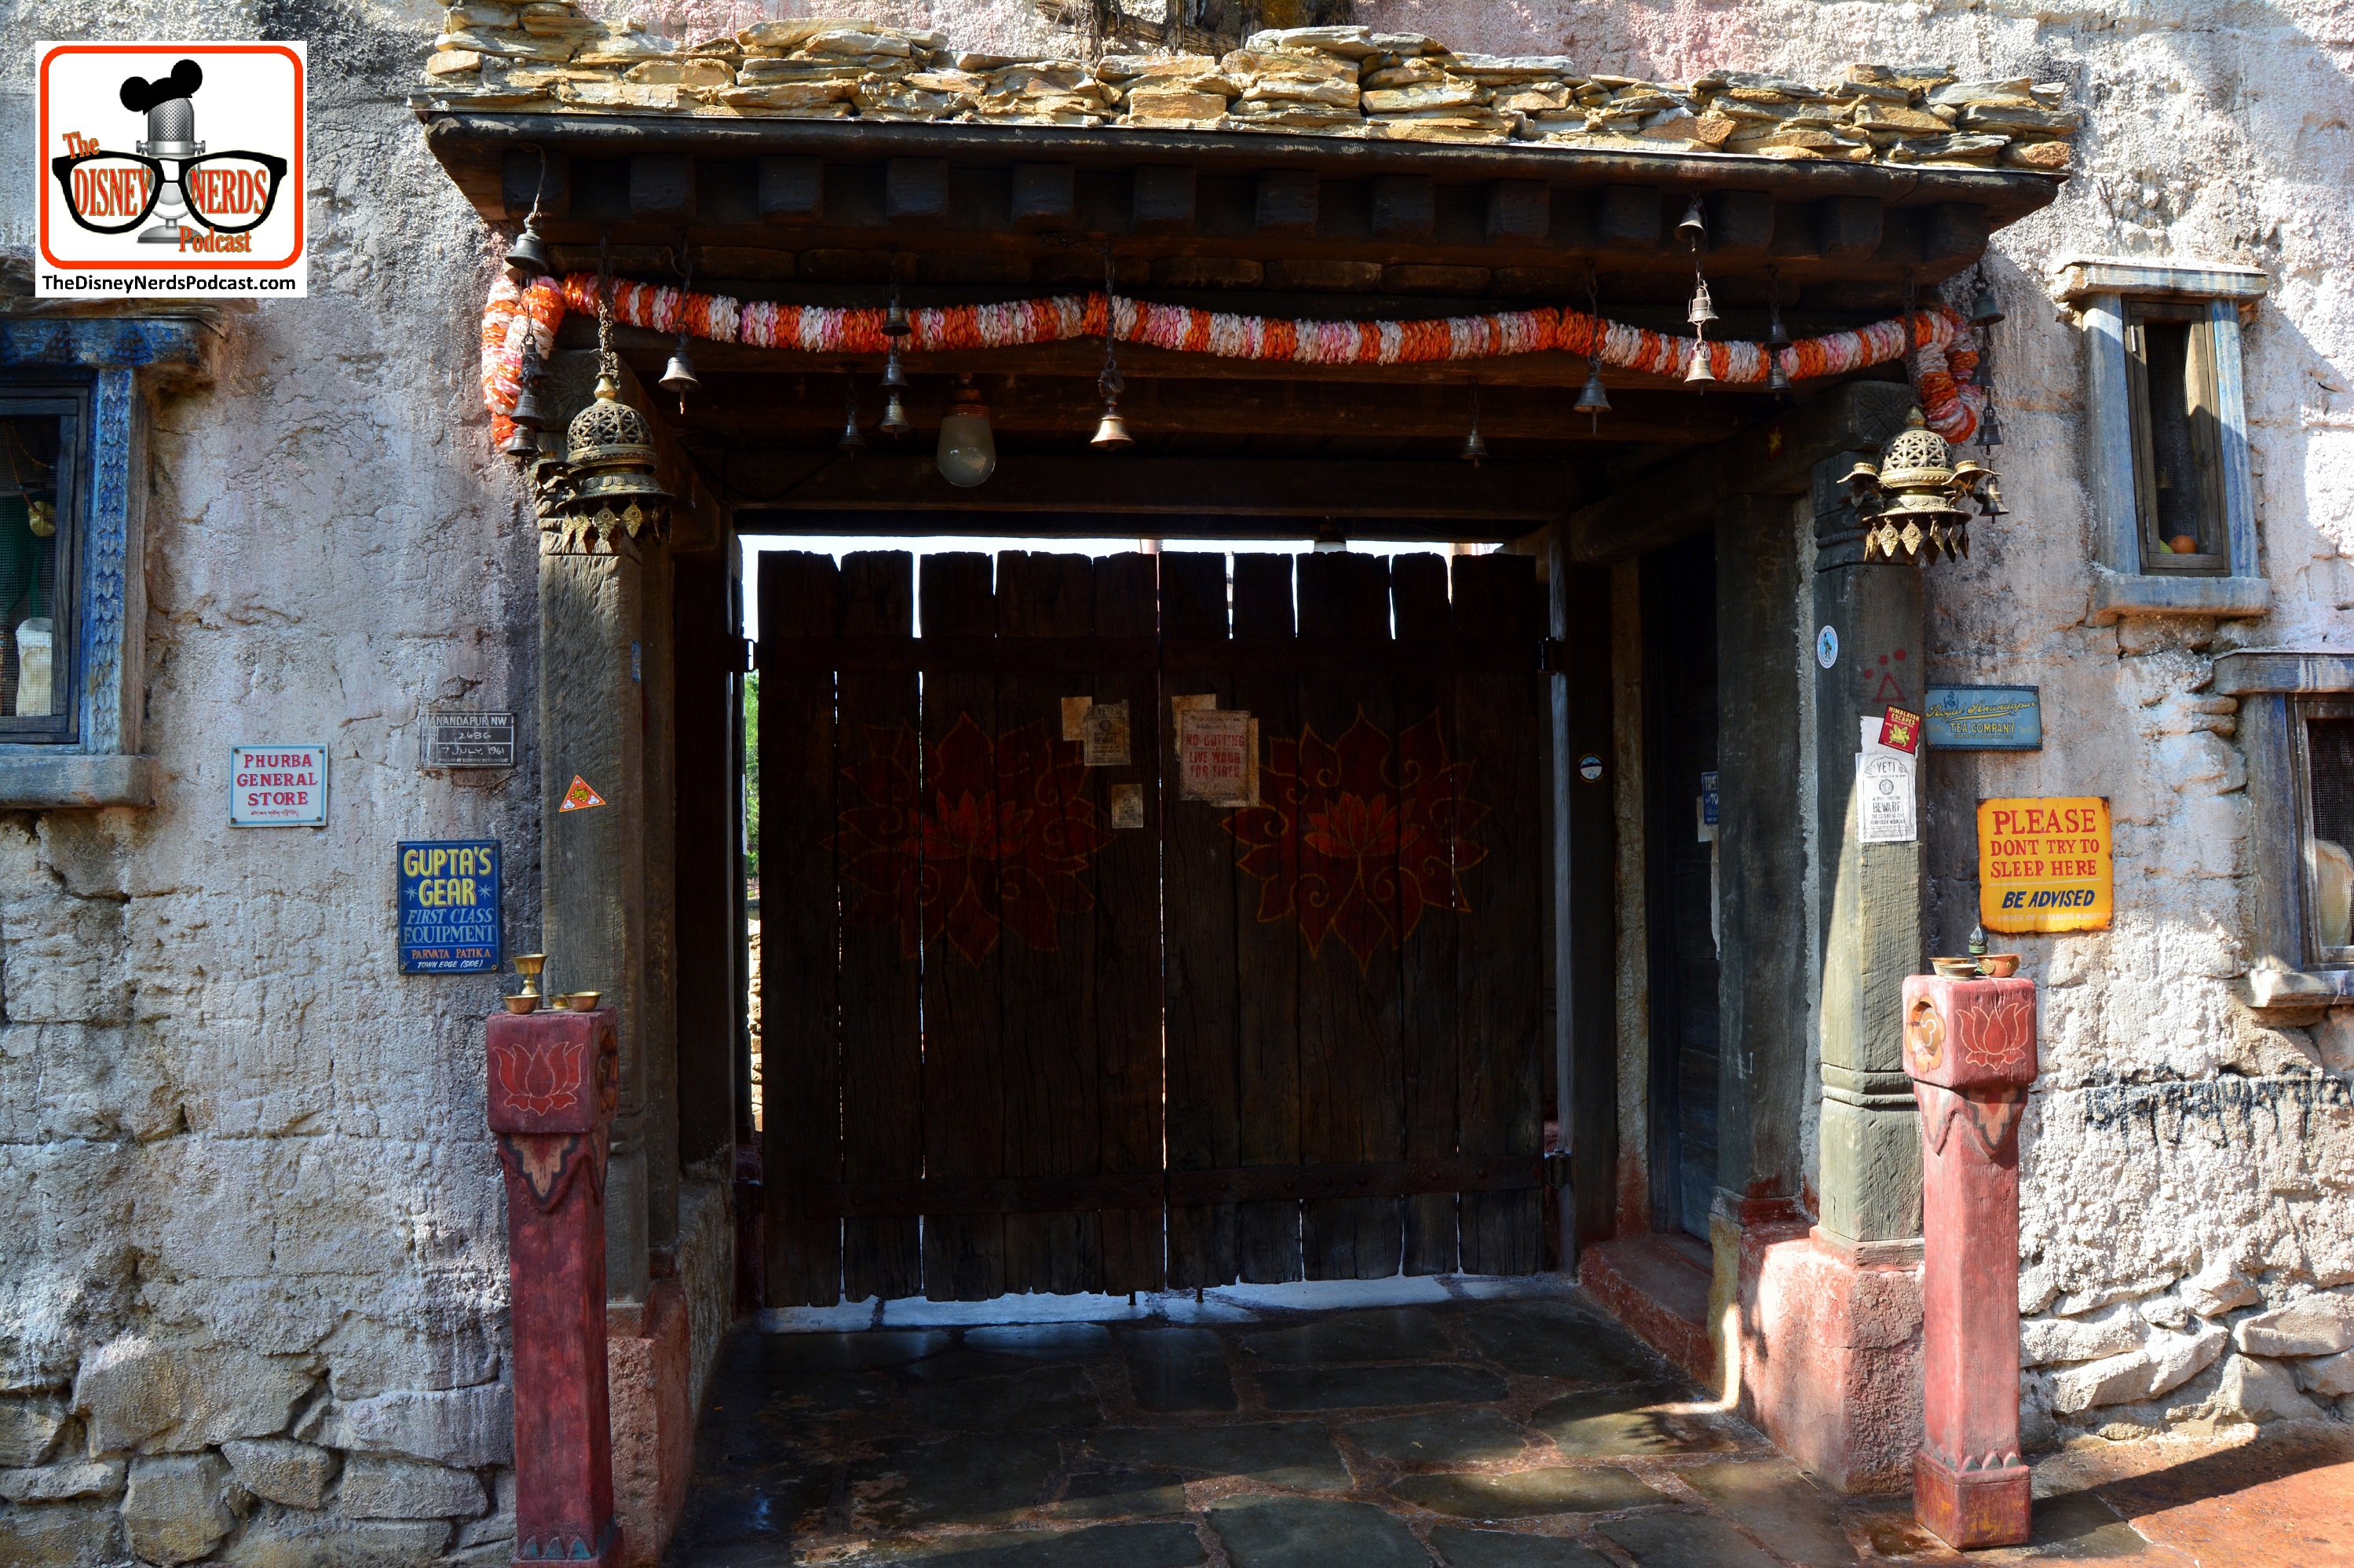 DNP April 2016 Photo Report: Animal Kingdom: Rivers of Light Might Not be ready to open - fast Pass return area is ready (This is one of two that I noticed)